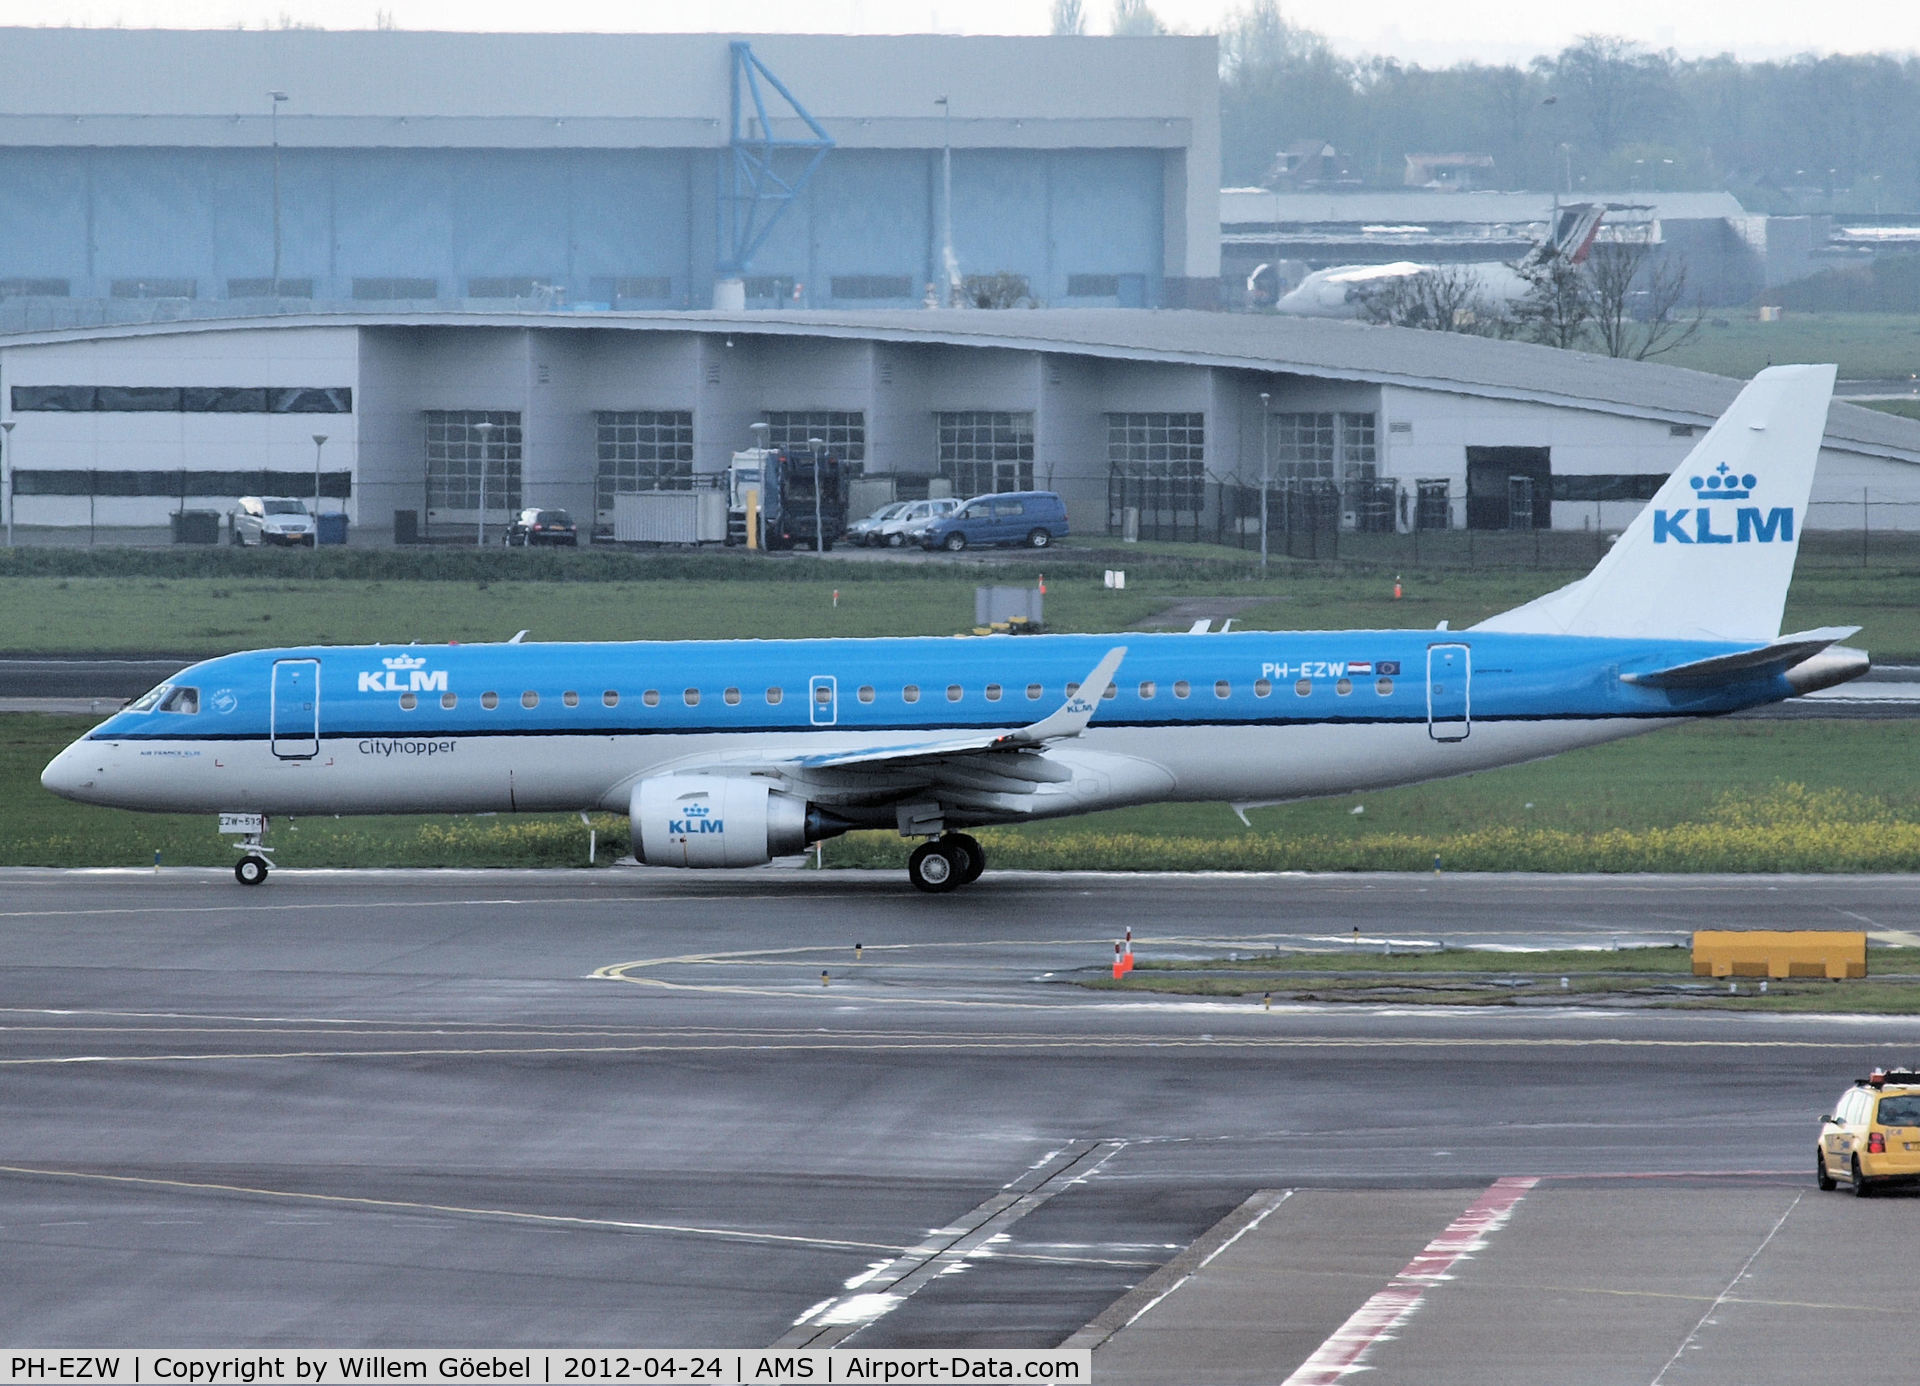 PH-EZW, 2012 Embraer 190LR (ERJ-190-100LR) C/N 19000533, Taxi to the runway of Schiphol Airport